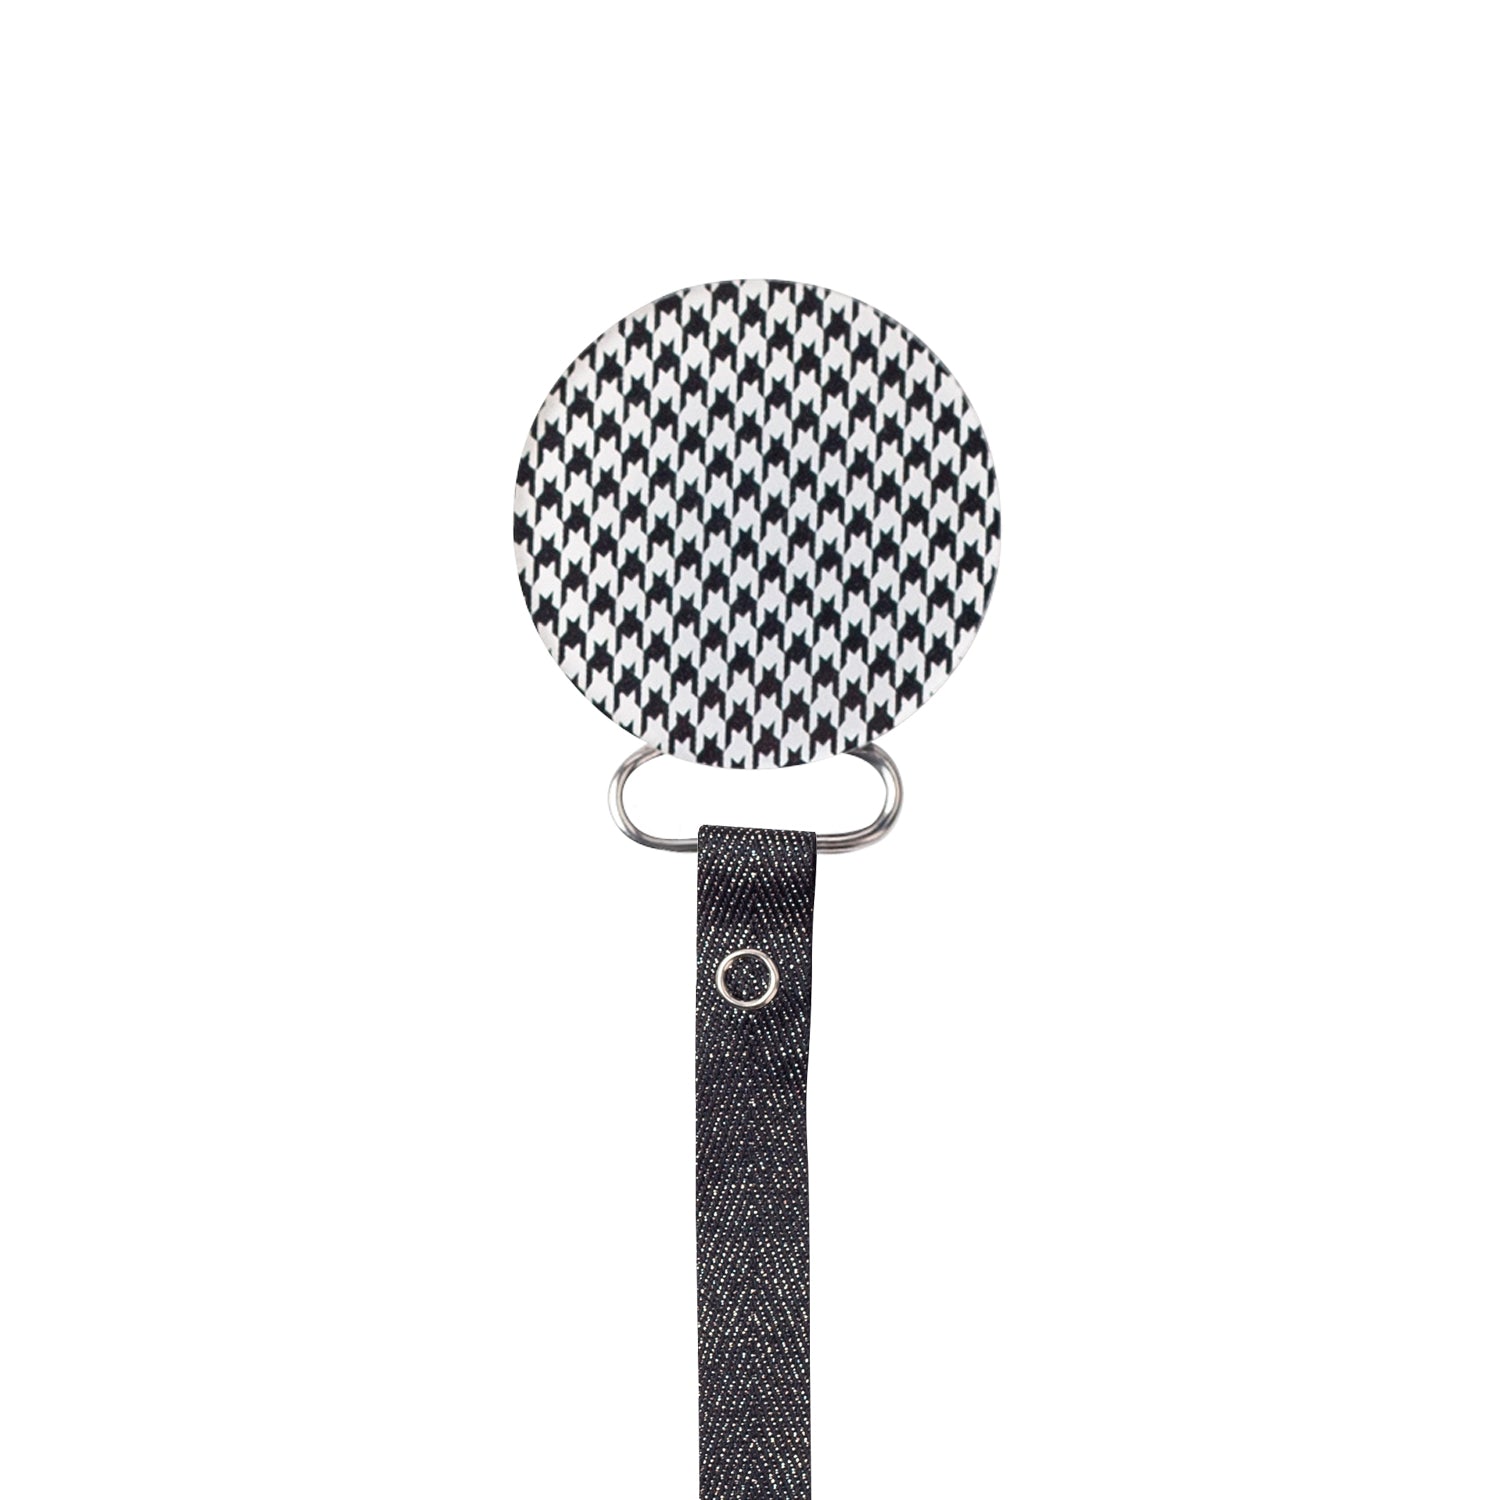 Classy Paci Houndstooth Black White Check Circle, white, grey, baby boy girl pacifier clip Friggs Bibs Gift Set